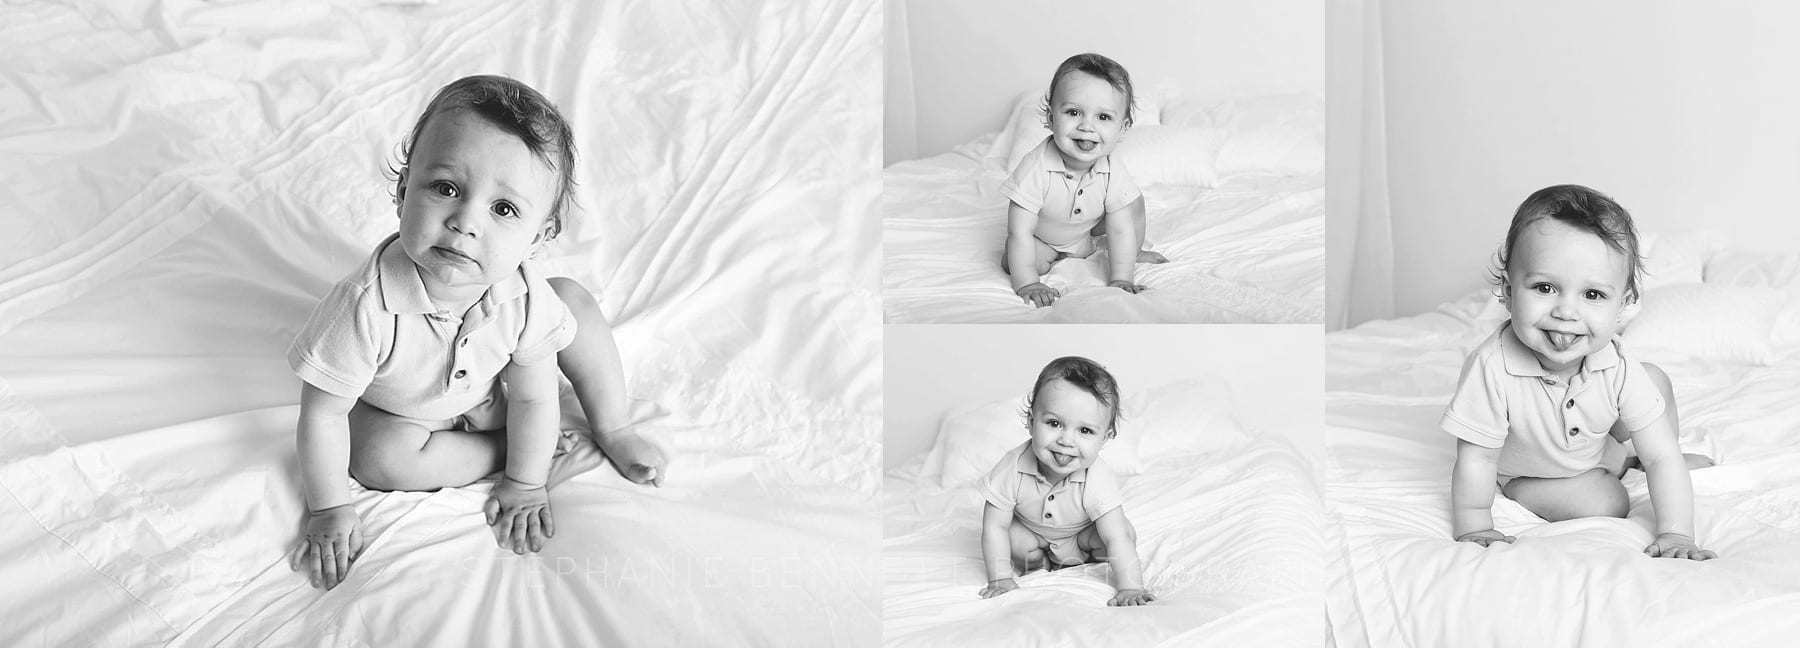 Photography Studio Family Photographer | Newborn, Baby, Child and Family Photographer based in Northfield Faribault | Finalist for Best Photographer in Southern MN. Owatonna Cannon Falls Farmington